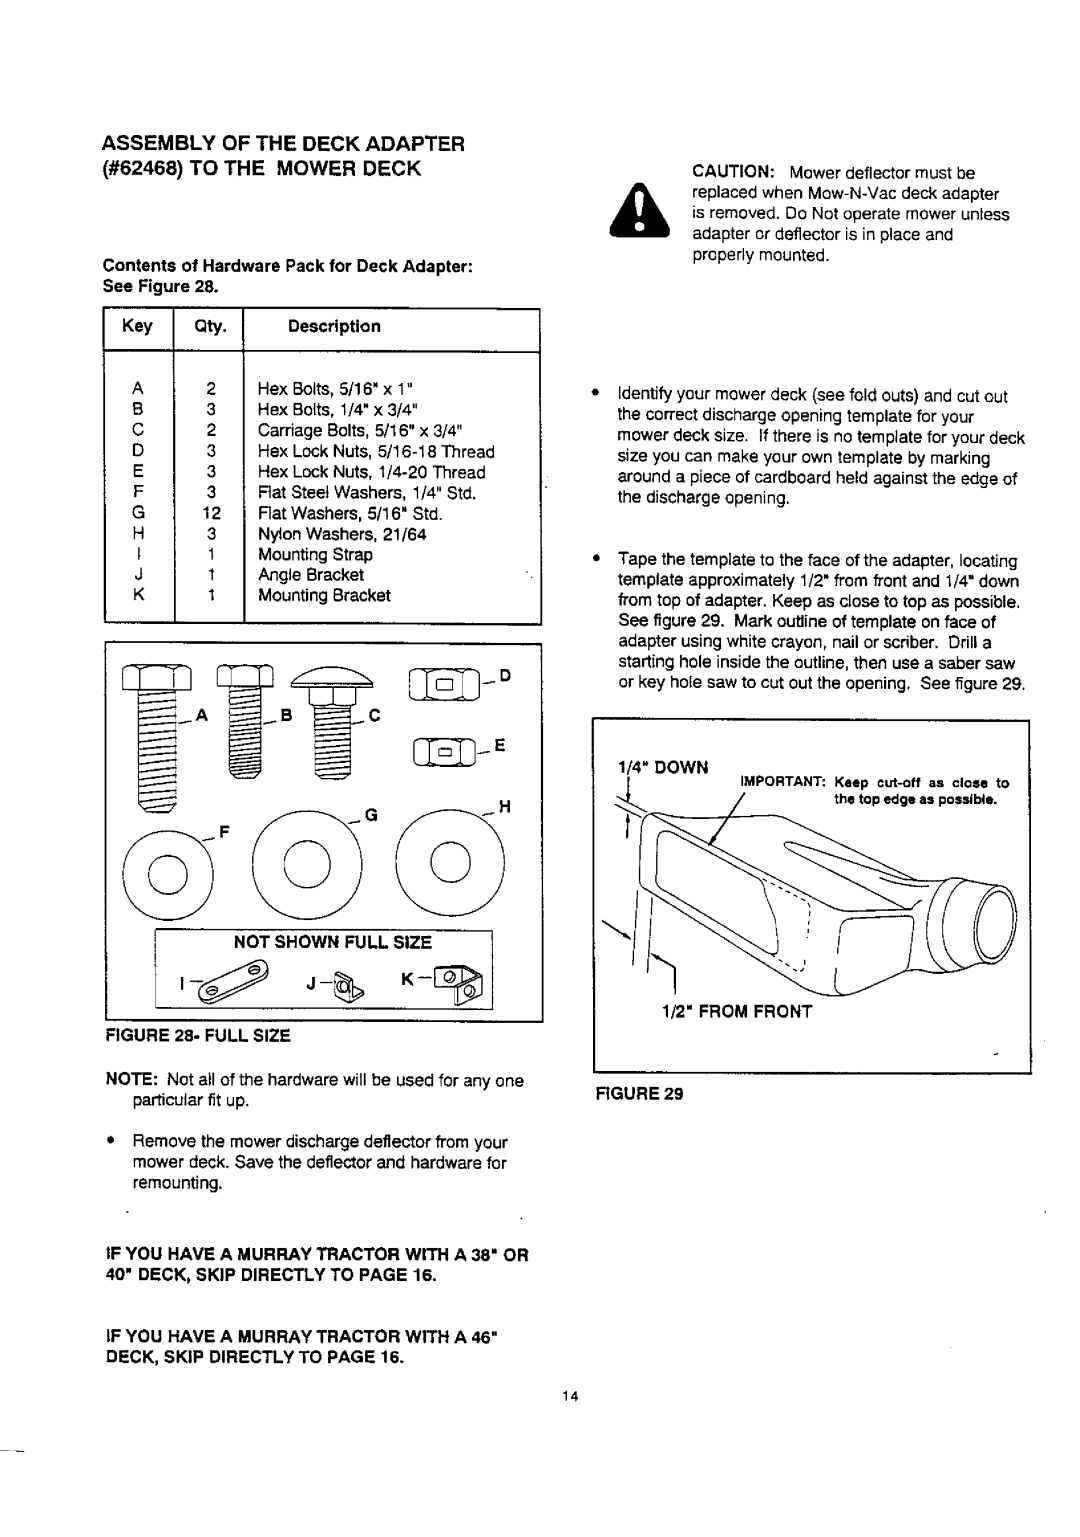 Craftsman 486.24515 Assembly Of The Deck Adapter, #62468 TO THE MOWER DECK, Key Qty. Description, Not Shown Full Size 